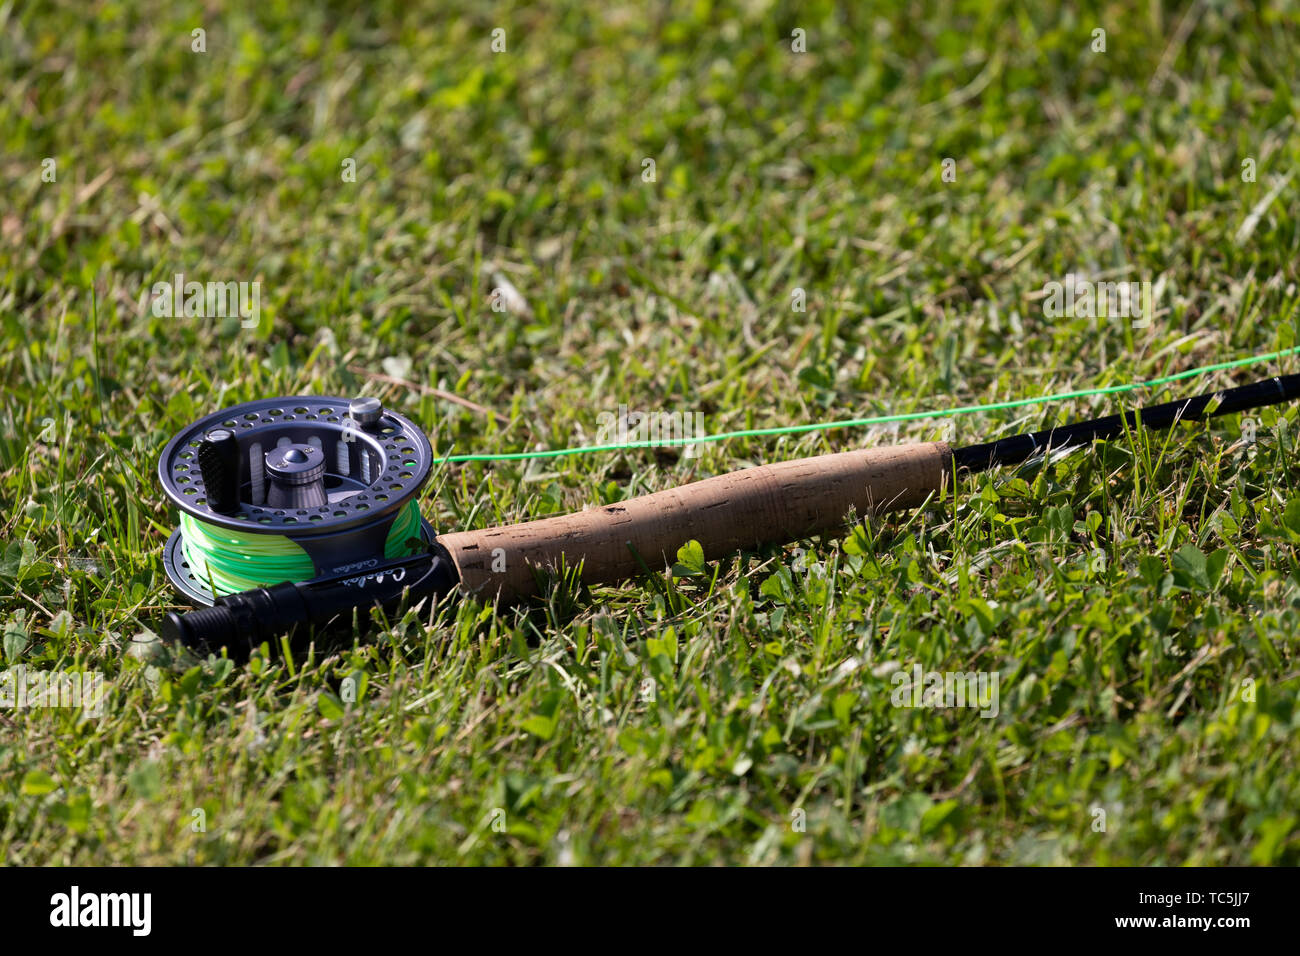 Cabelas Fly Fishing Rod and Reel Stock Photo - Alamy